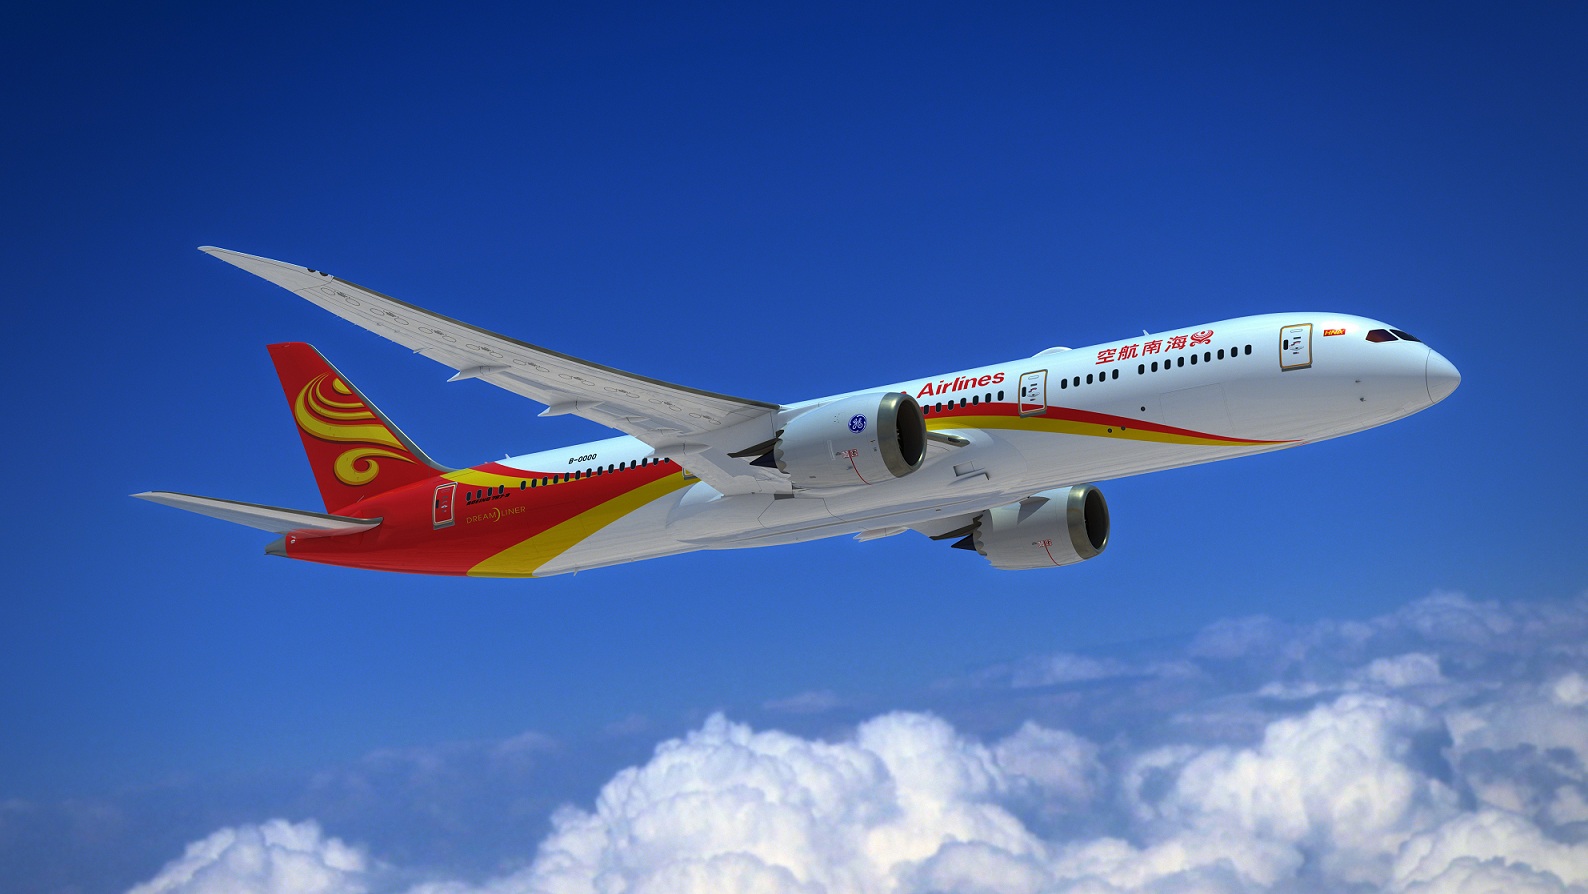 787-9; Hainan Airlines; Hainan Airlines Celebrate Delivery of Airlines’ First 787-9 Dreamliner; GE Engines; View from Bottom Left; K66552